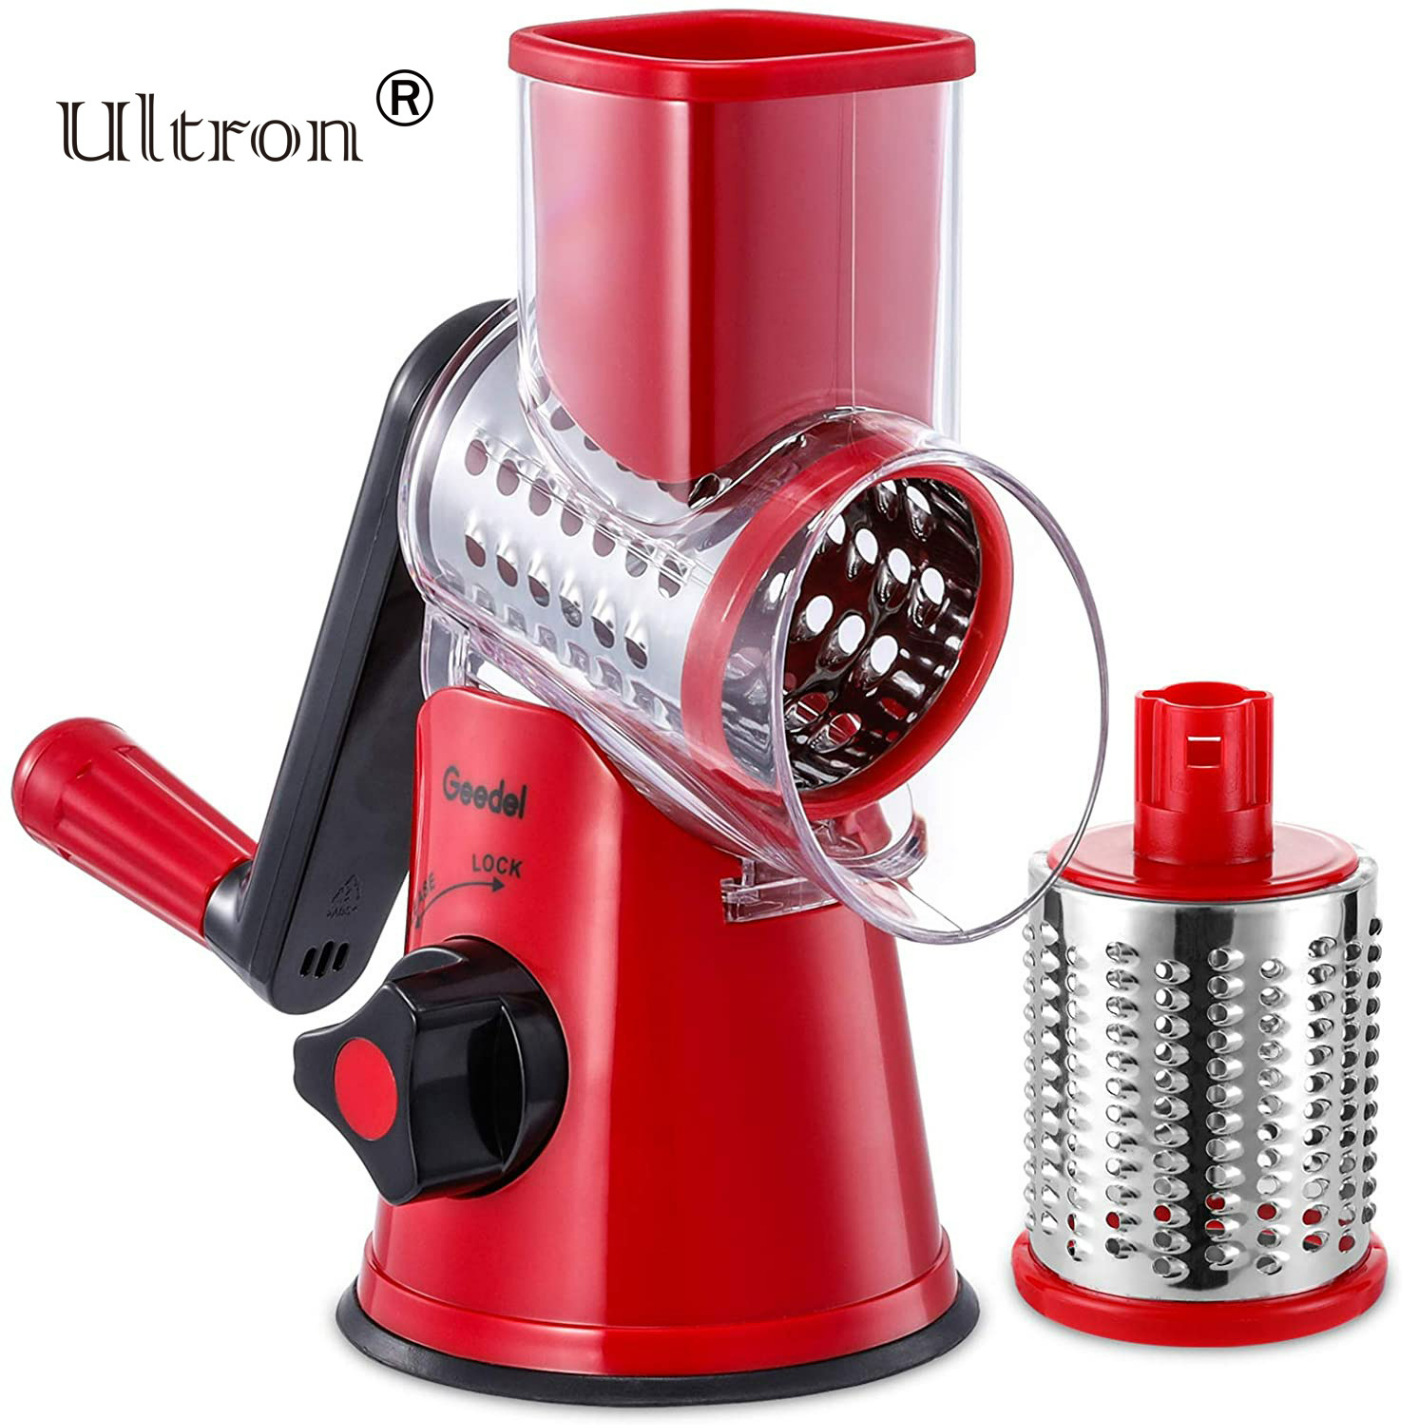 Ultron Rotary Cheese Grater, Kitchen Mandoline Grater with 2 Drum Blades, Easy to Clean Rotary Grater Cheese Shredder for Fruit, Vegetables, Nuts 